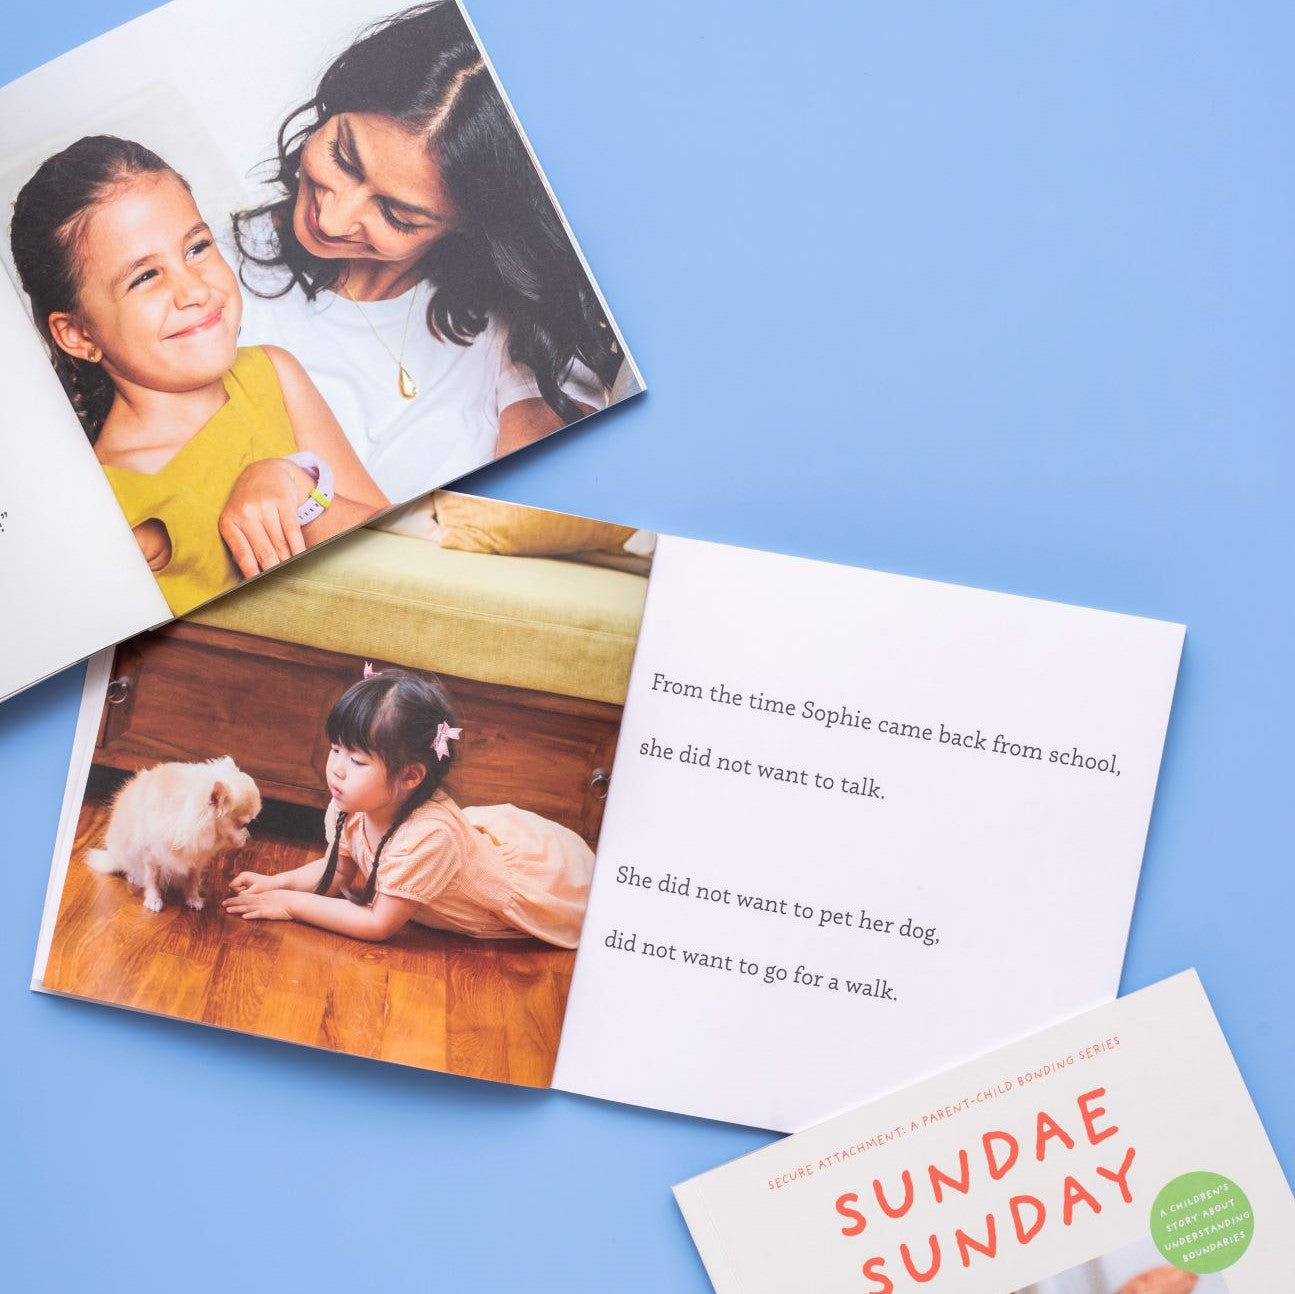 <span style="font-size:15px; font-weight:600; line-spacing:2px;"> SECURE ATTACHMENT SERIES </span><br>Sundae Sunday<br> <span style="font-size:13px;"> NIDHI ARORA</span>